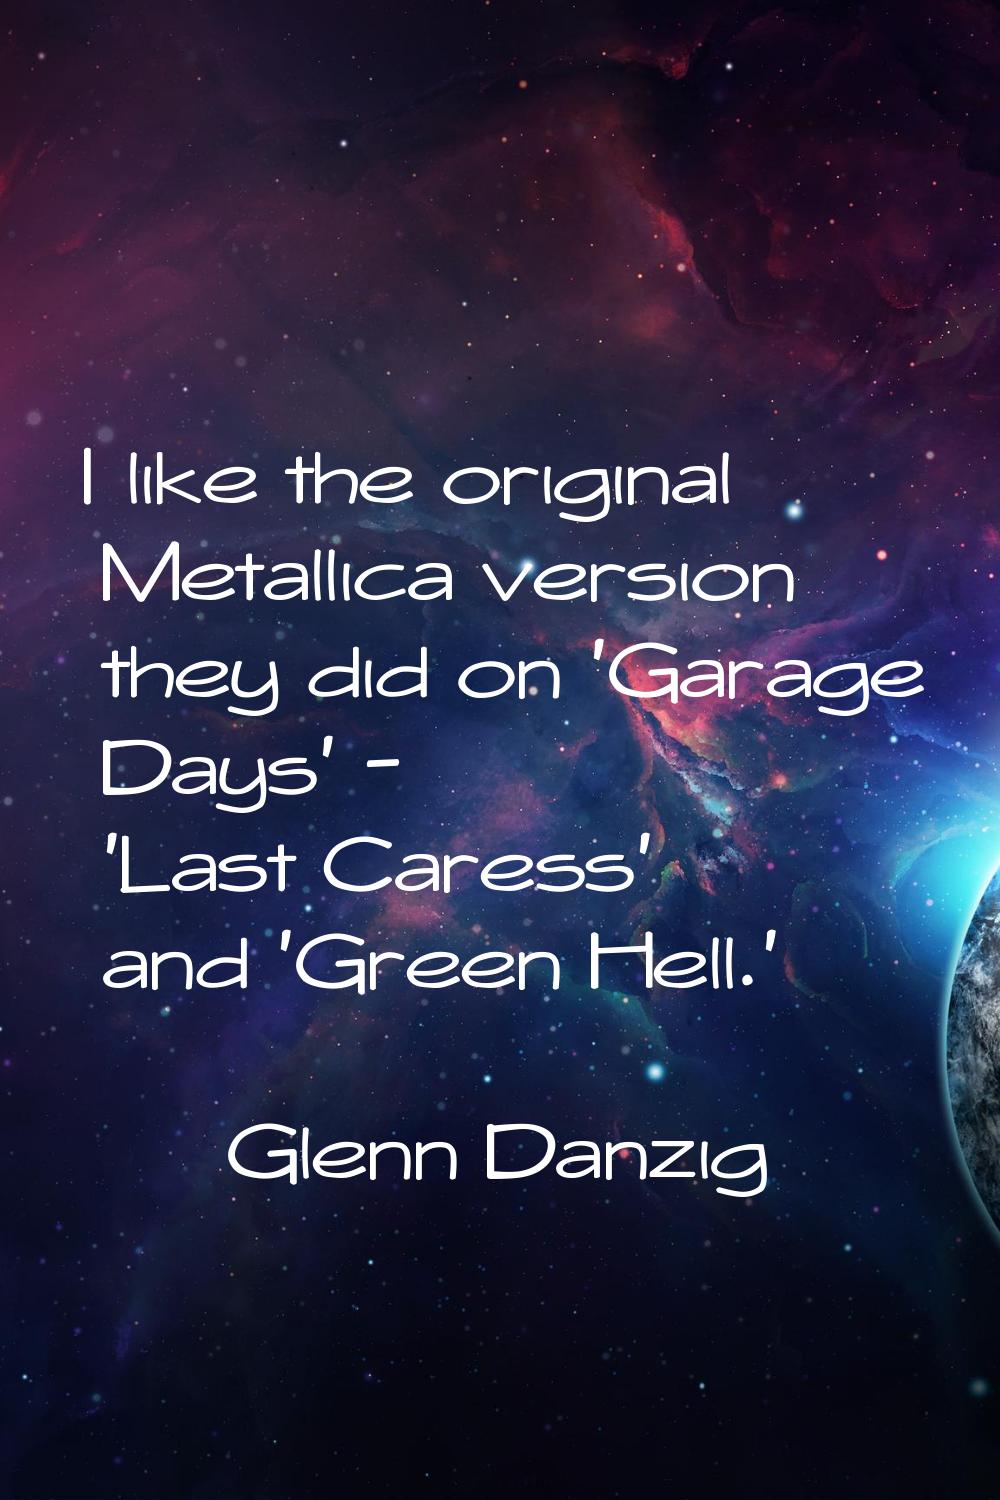 I like the original Metallica version they did on 'Garage Days' - 'Last Caress' and 'Green Hell.'